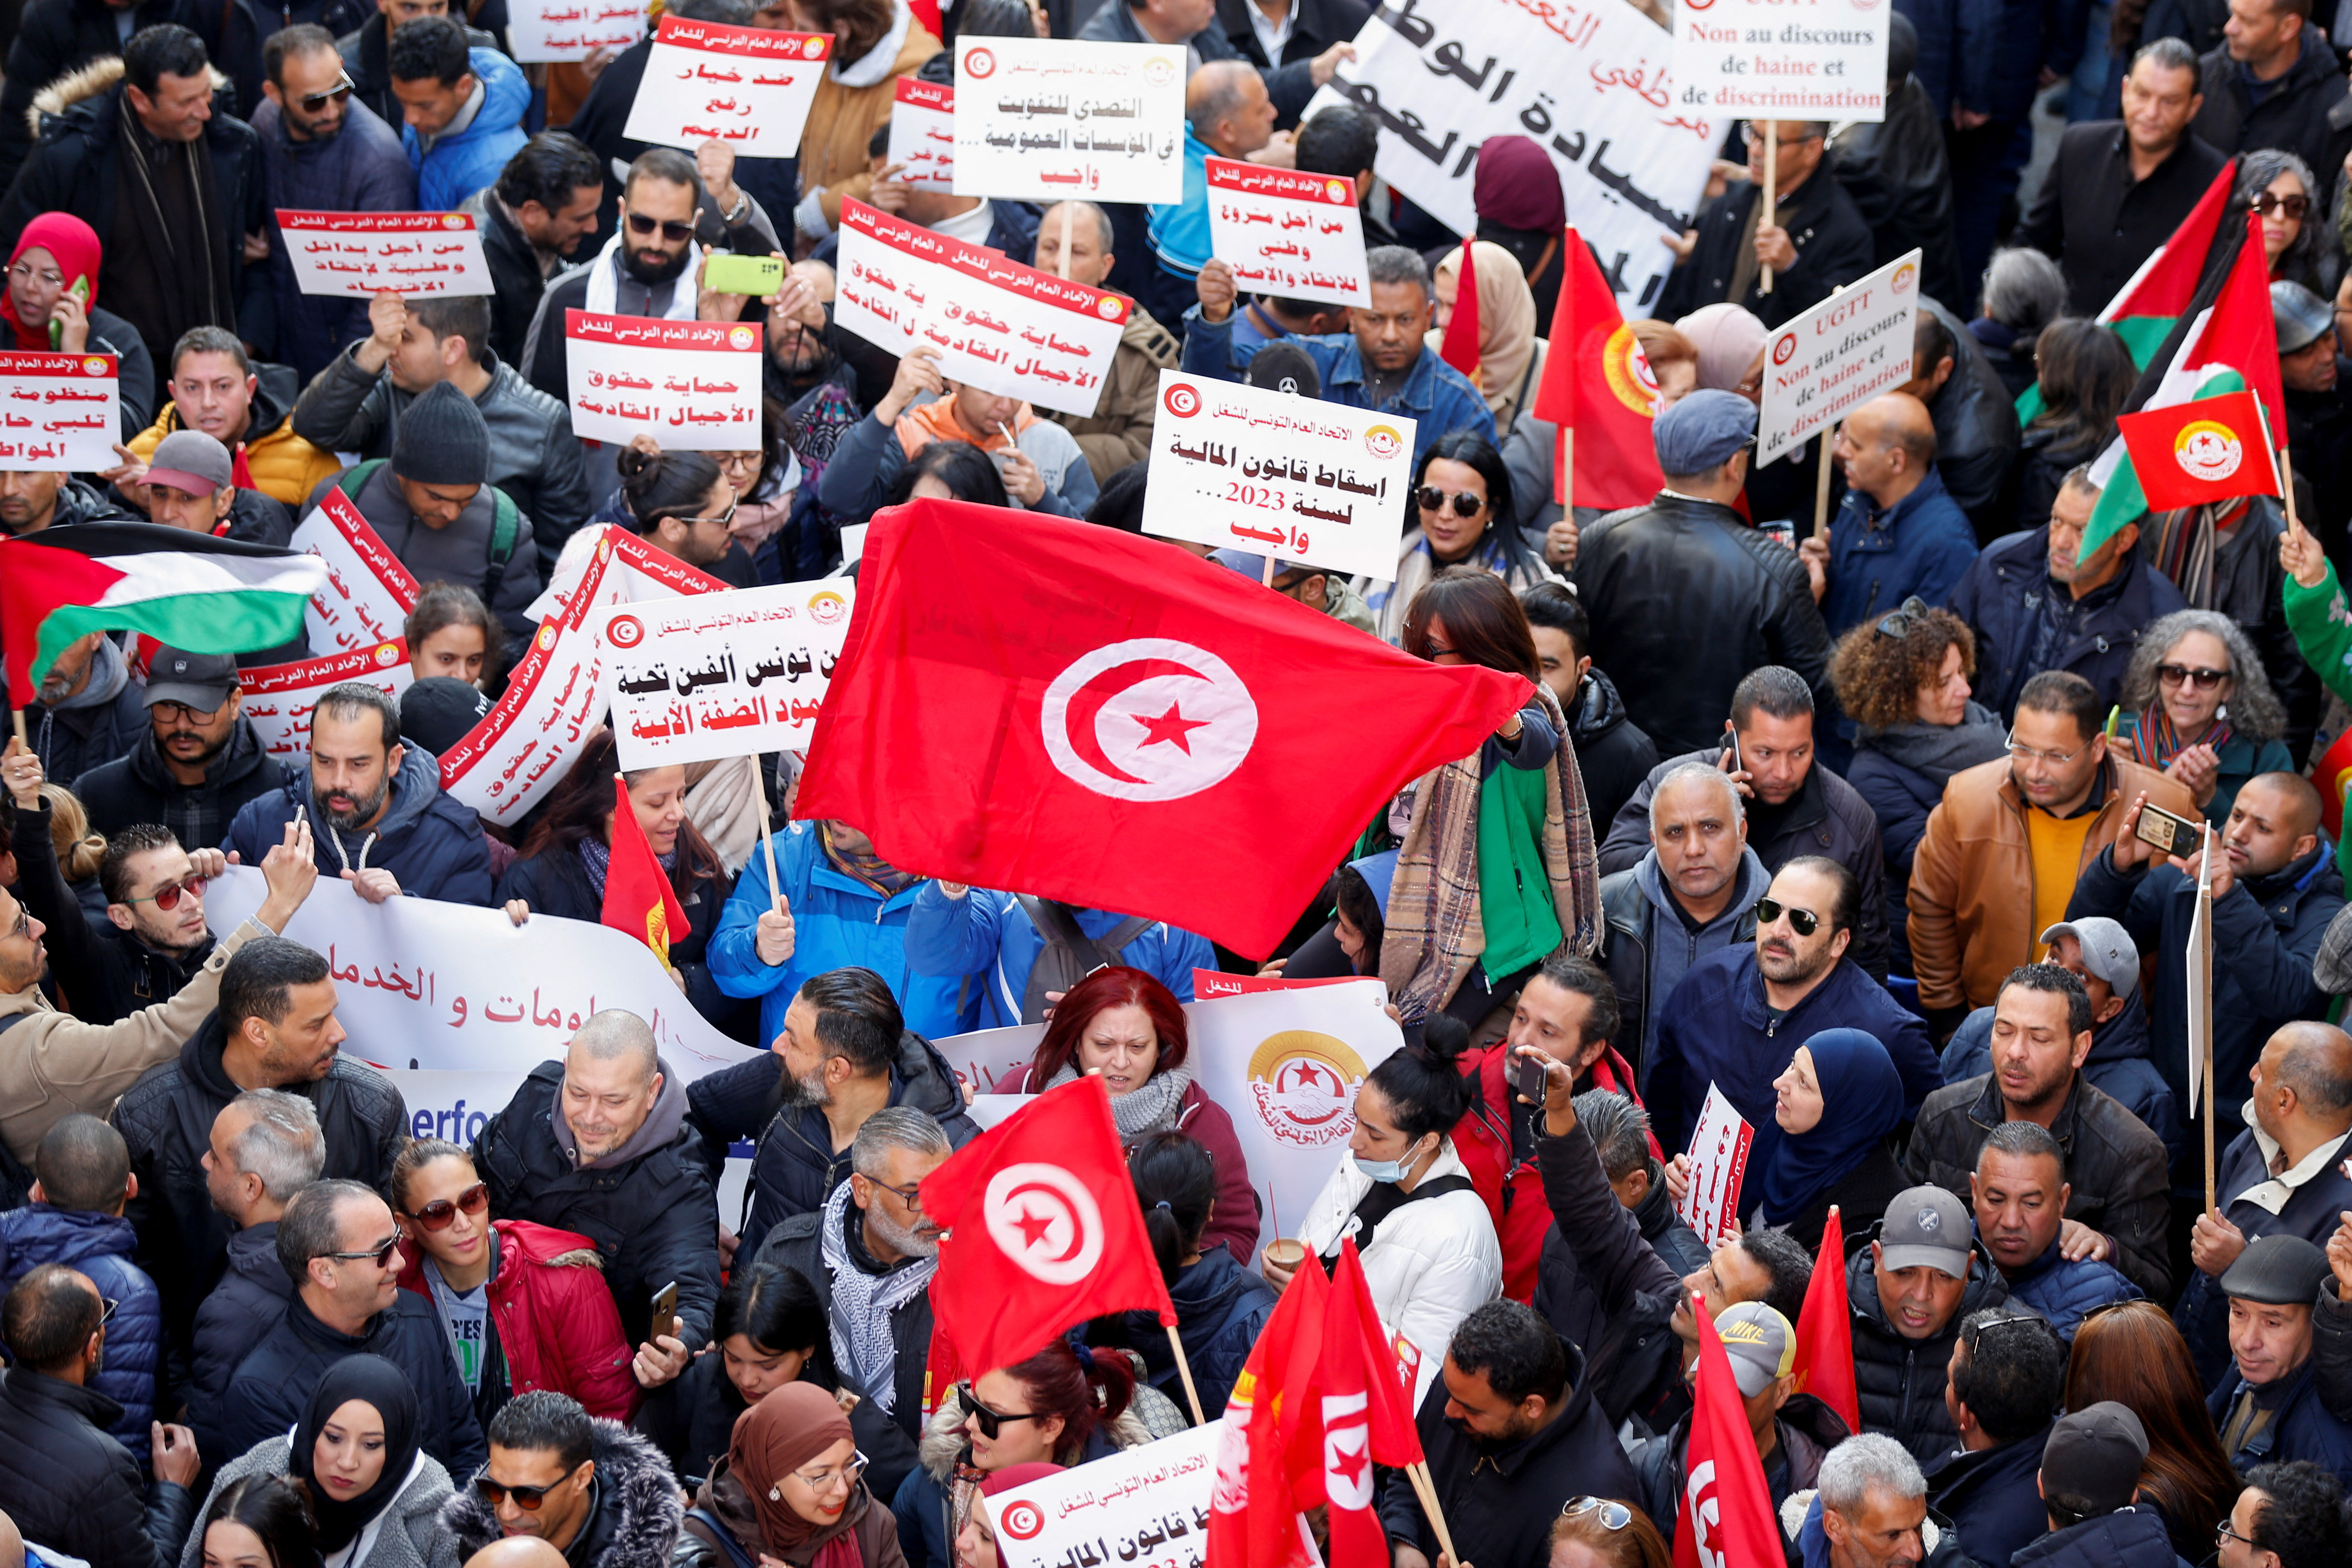 Supporters of the Tunisian General Labour Union (UGTT) protest in Tunis